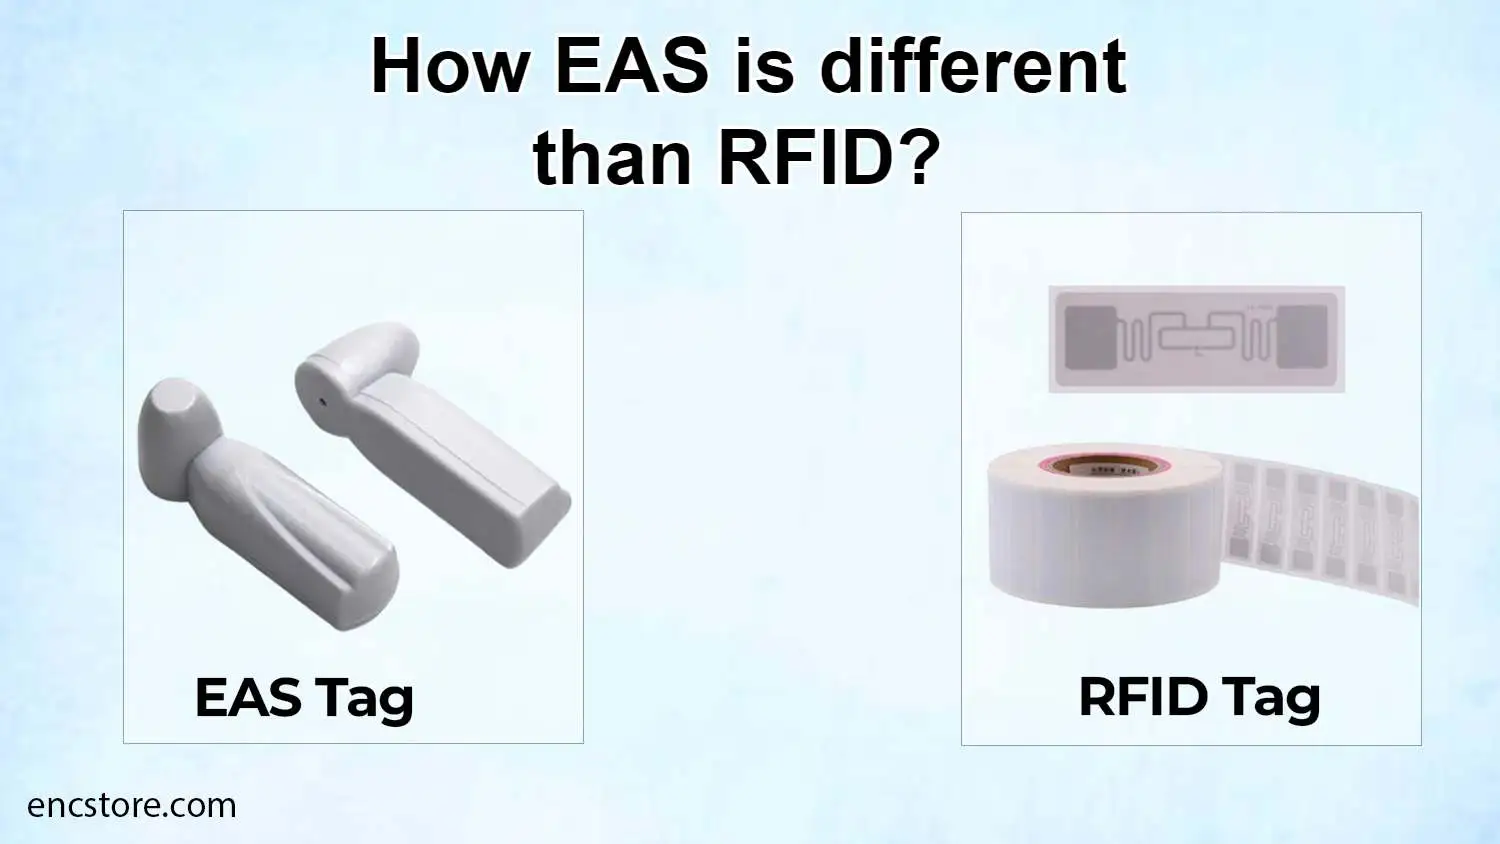 How EAS is different than RFID